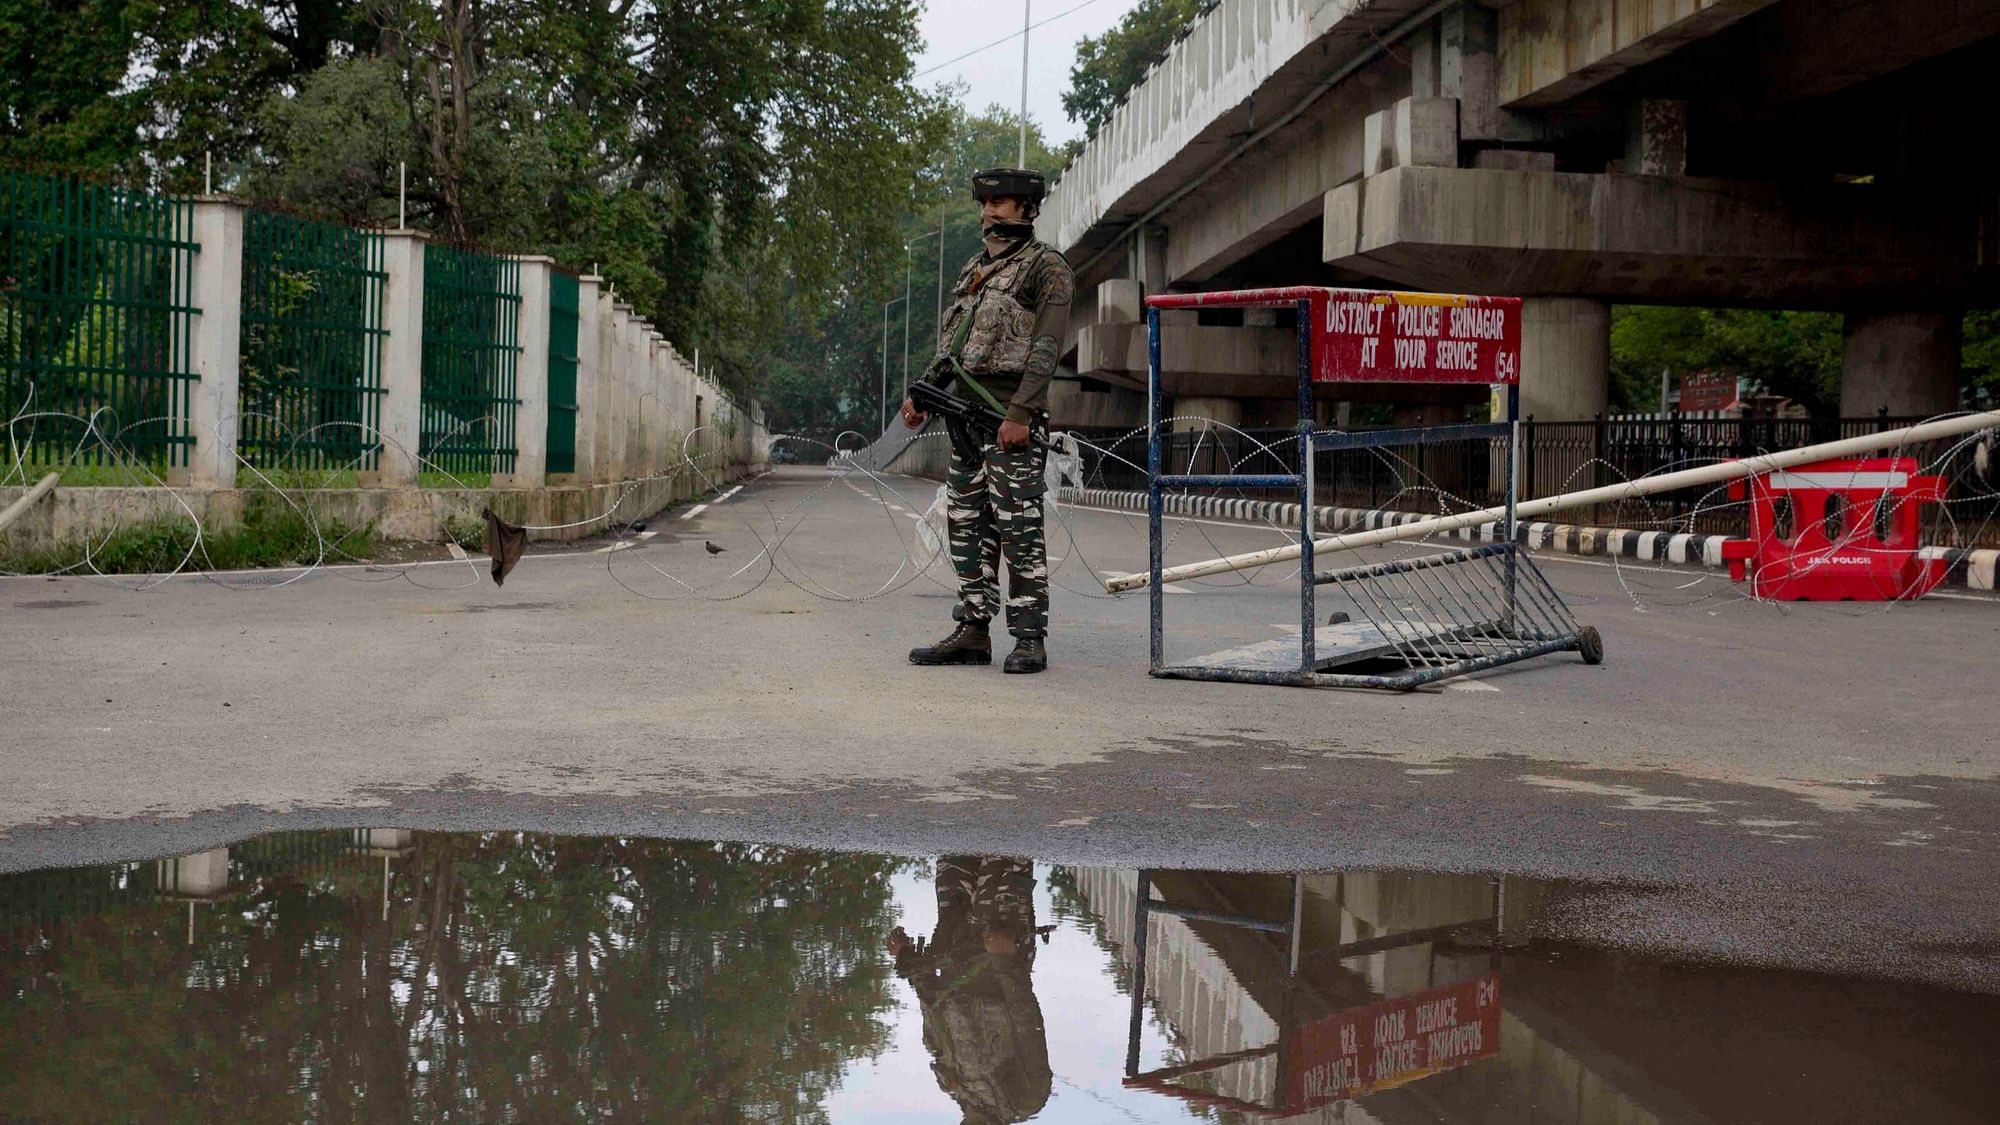 An Indian paramilitary soldier stands guard near a temporary checkpoint on the road leading towards the Independence Day parade venue during lockdown in Srinagar. Image used for representational purposes.